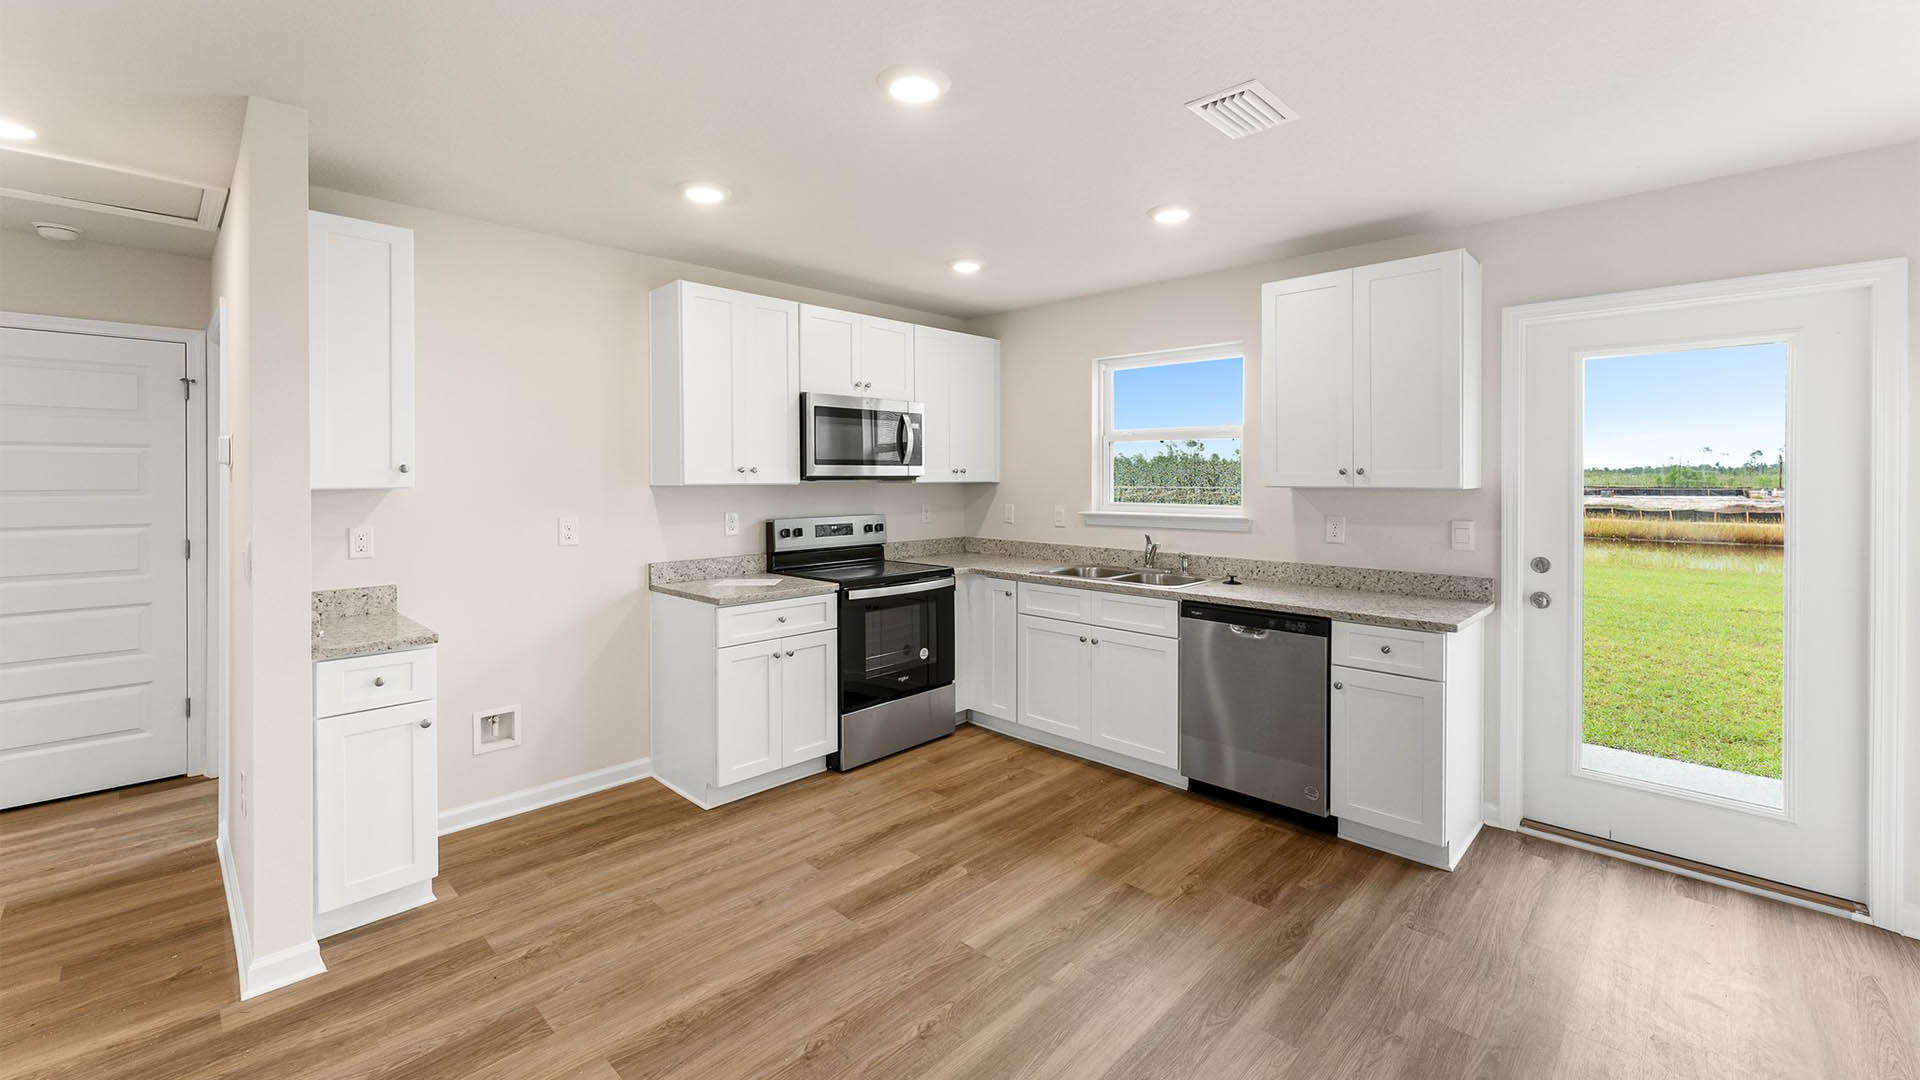 Kitchen with EVP flooring and granite countertops and stainless-steel appliances and hallway and backdoor.